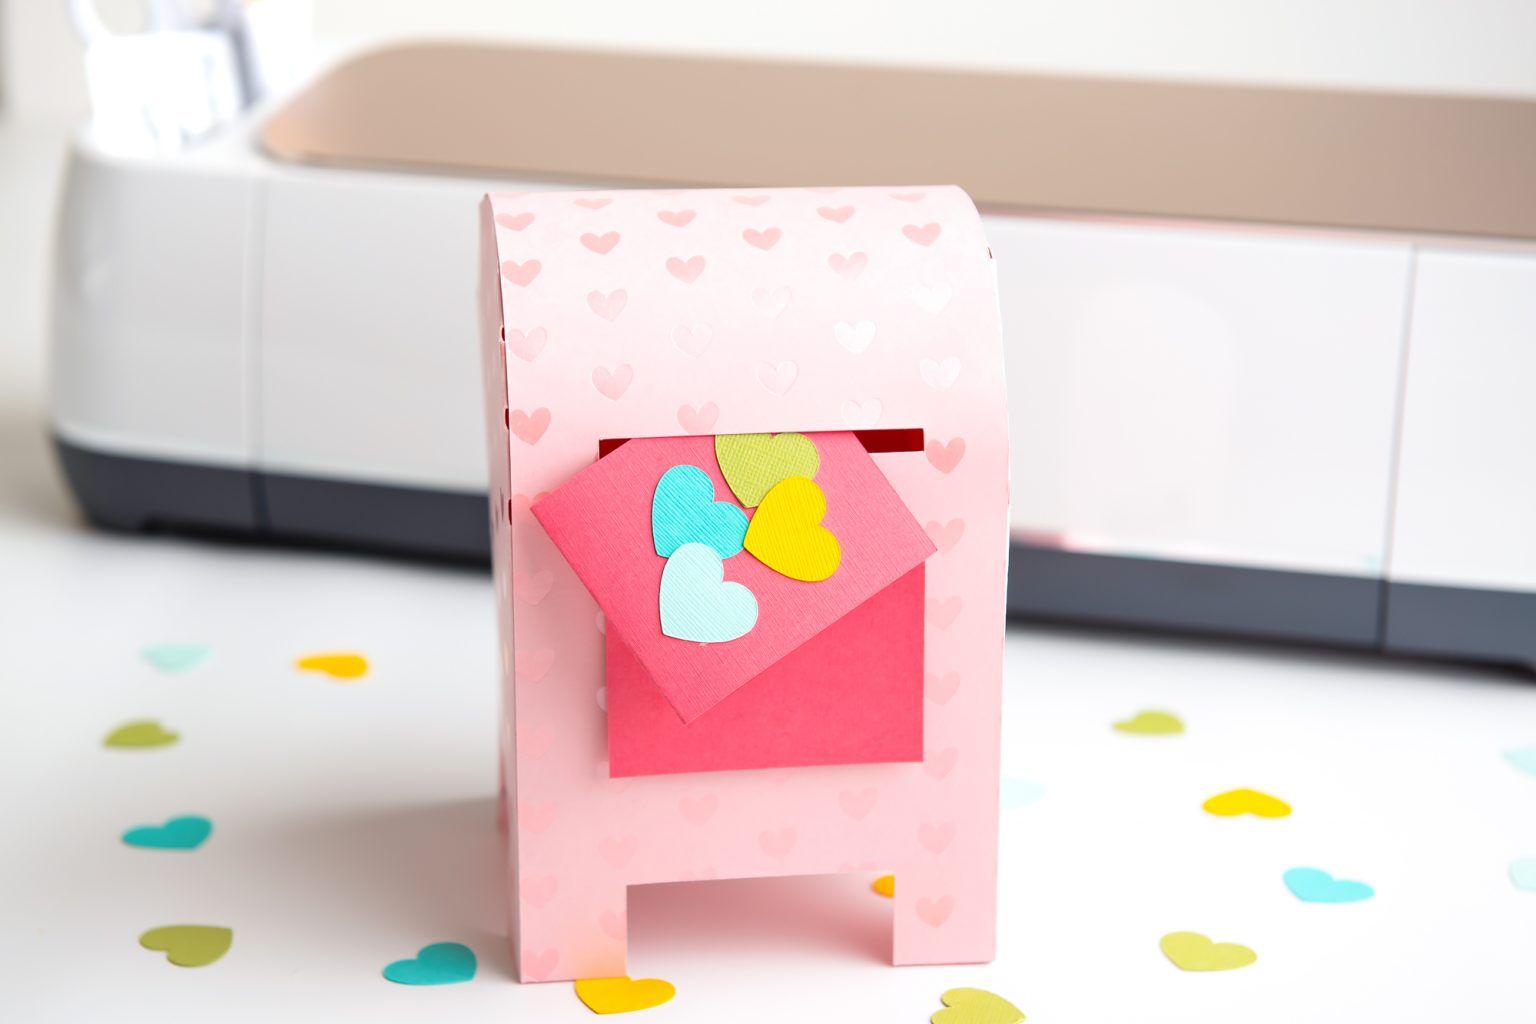 15 DIY Valentine's Day Gift Ideas for Your Significant Other